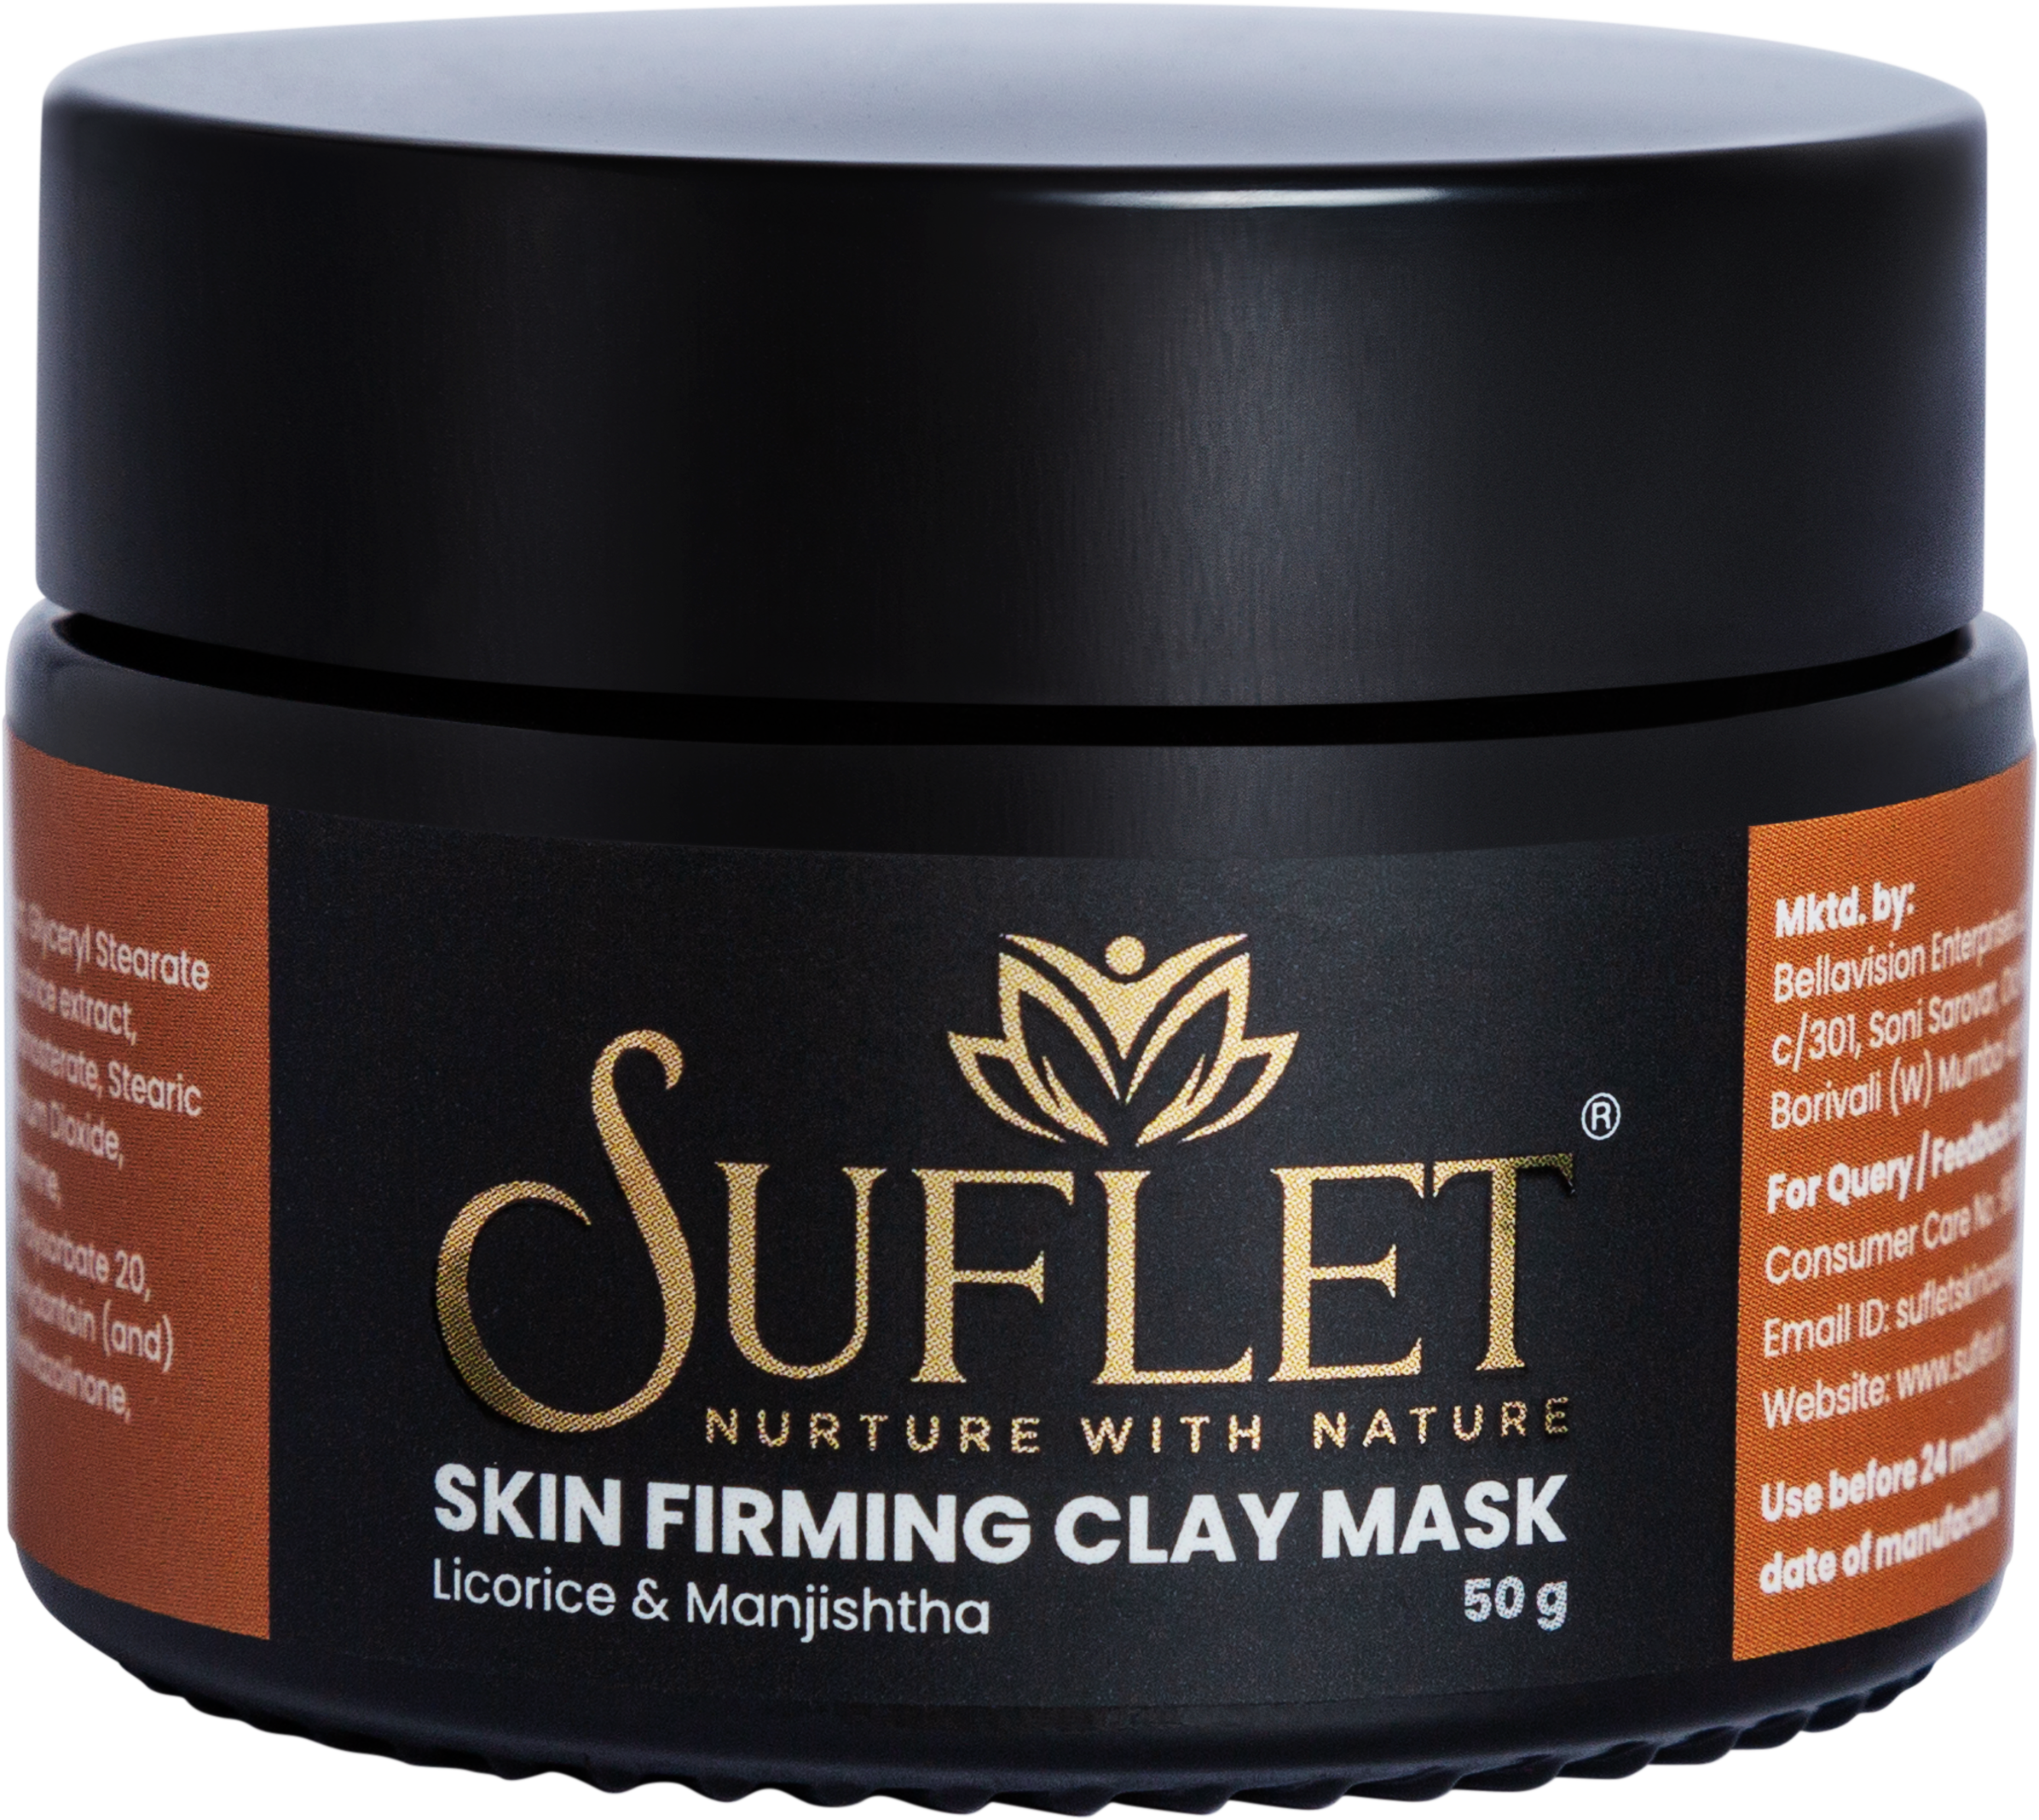 Suflet Skin Firming Clay Mask